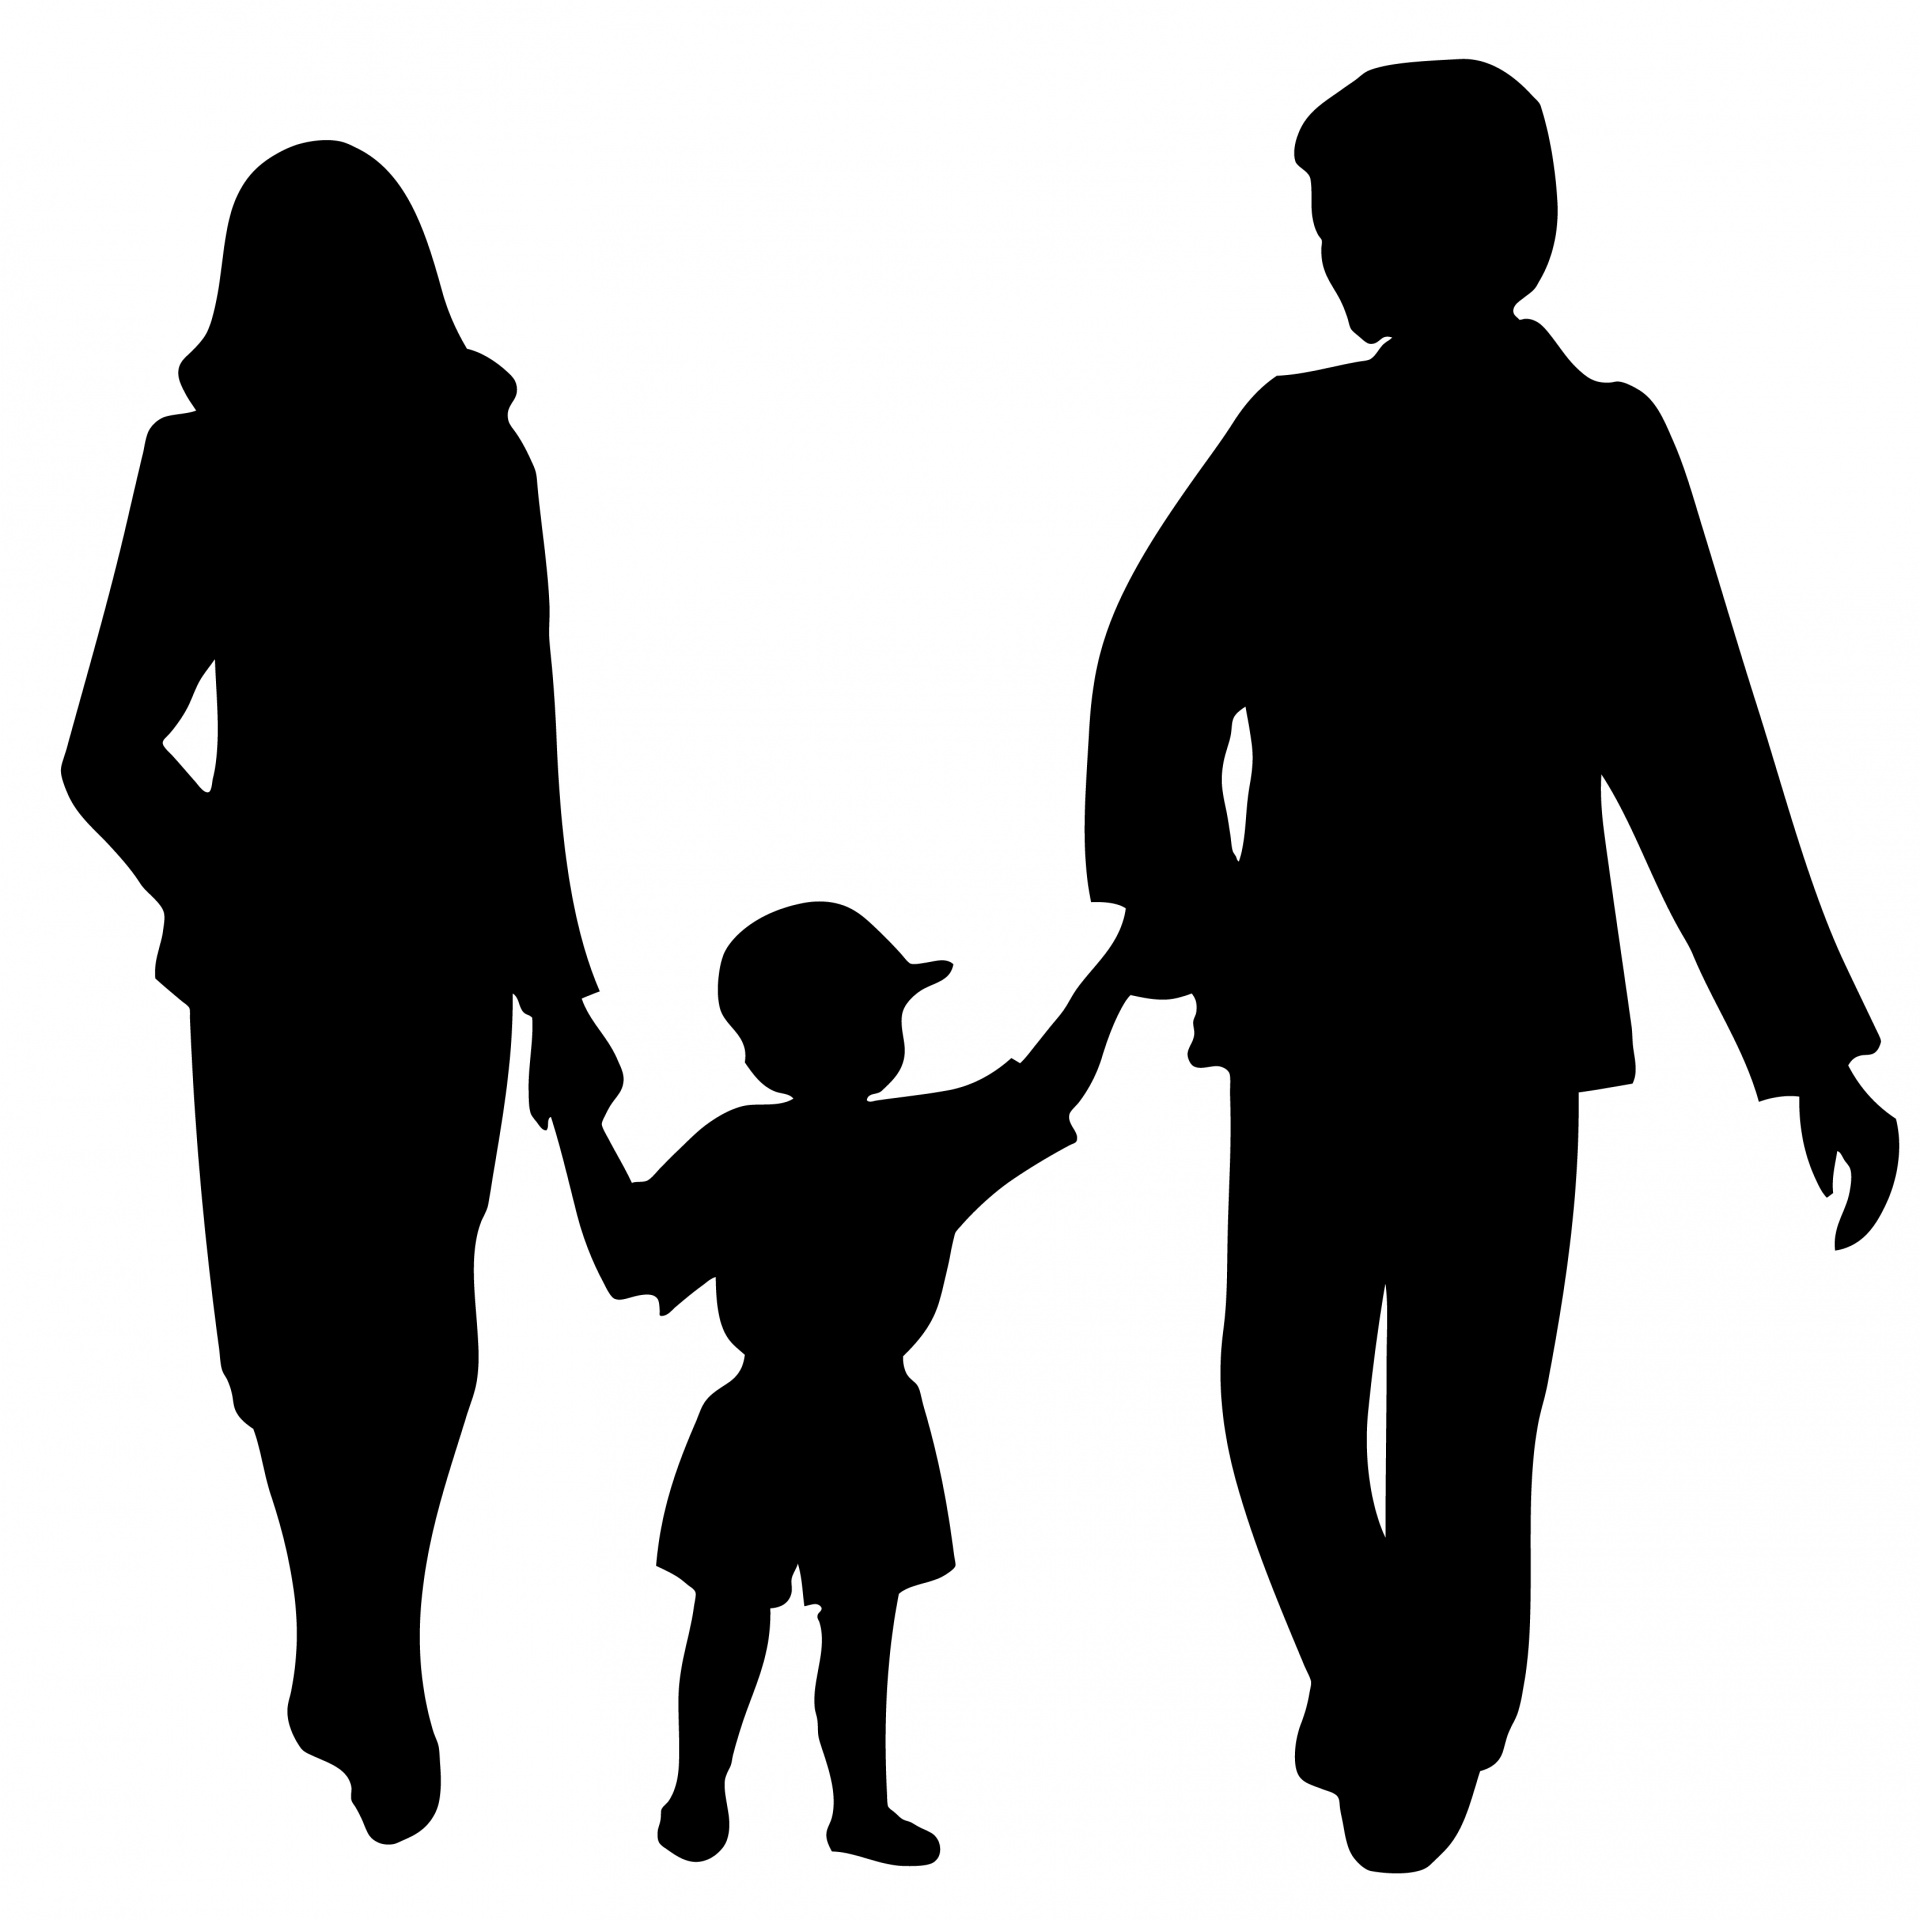 Family of mother, father and little boy holding hands black silhouette